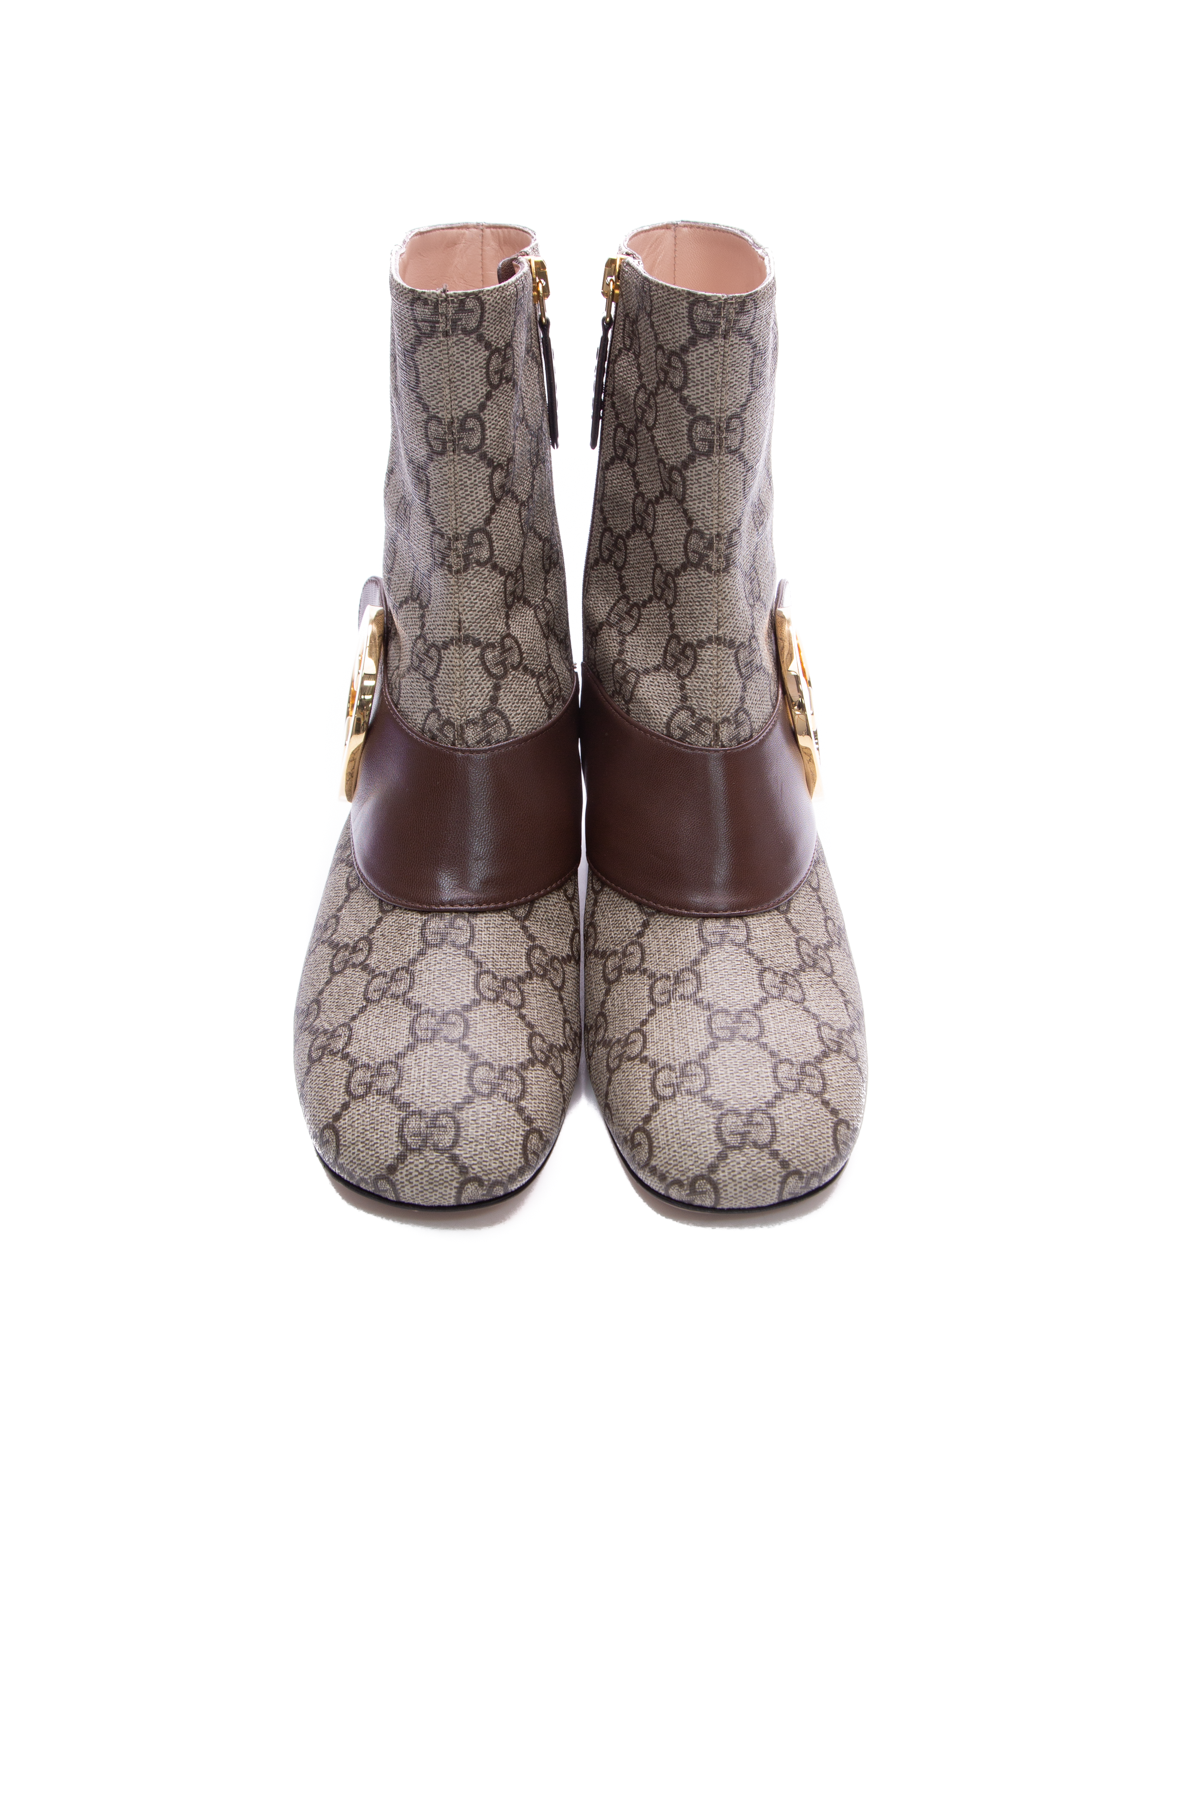 Gucci Supreme Blondie Ankle Boots - Size 37.5